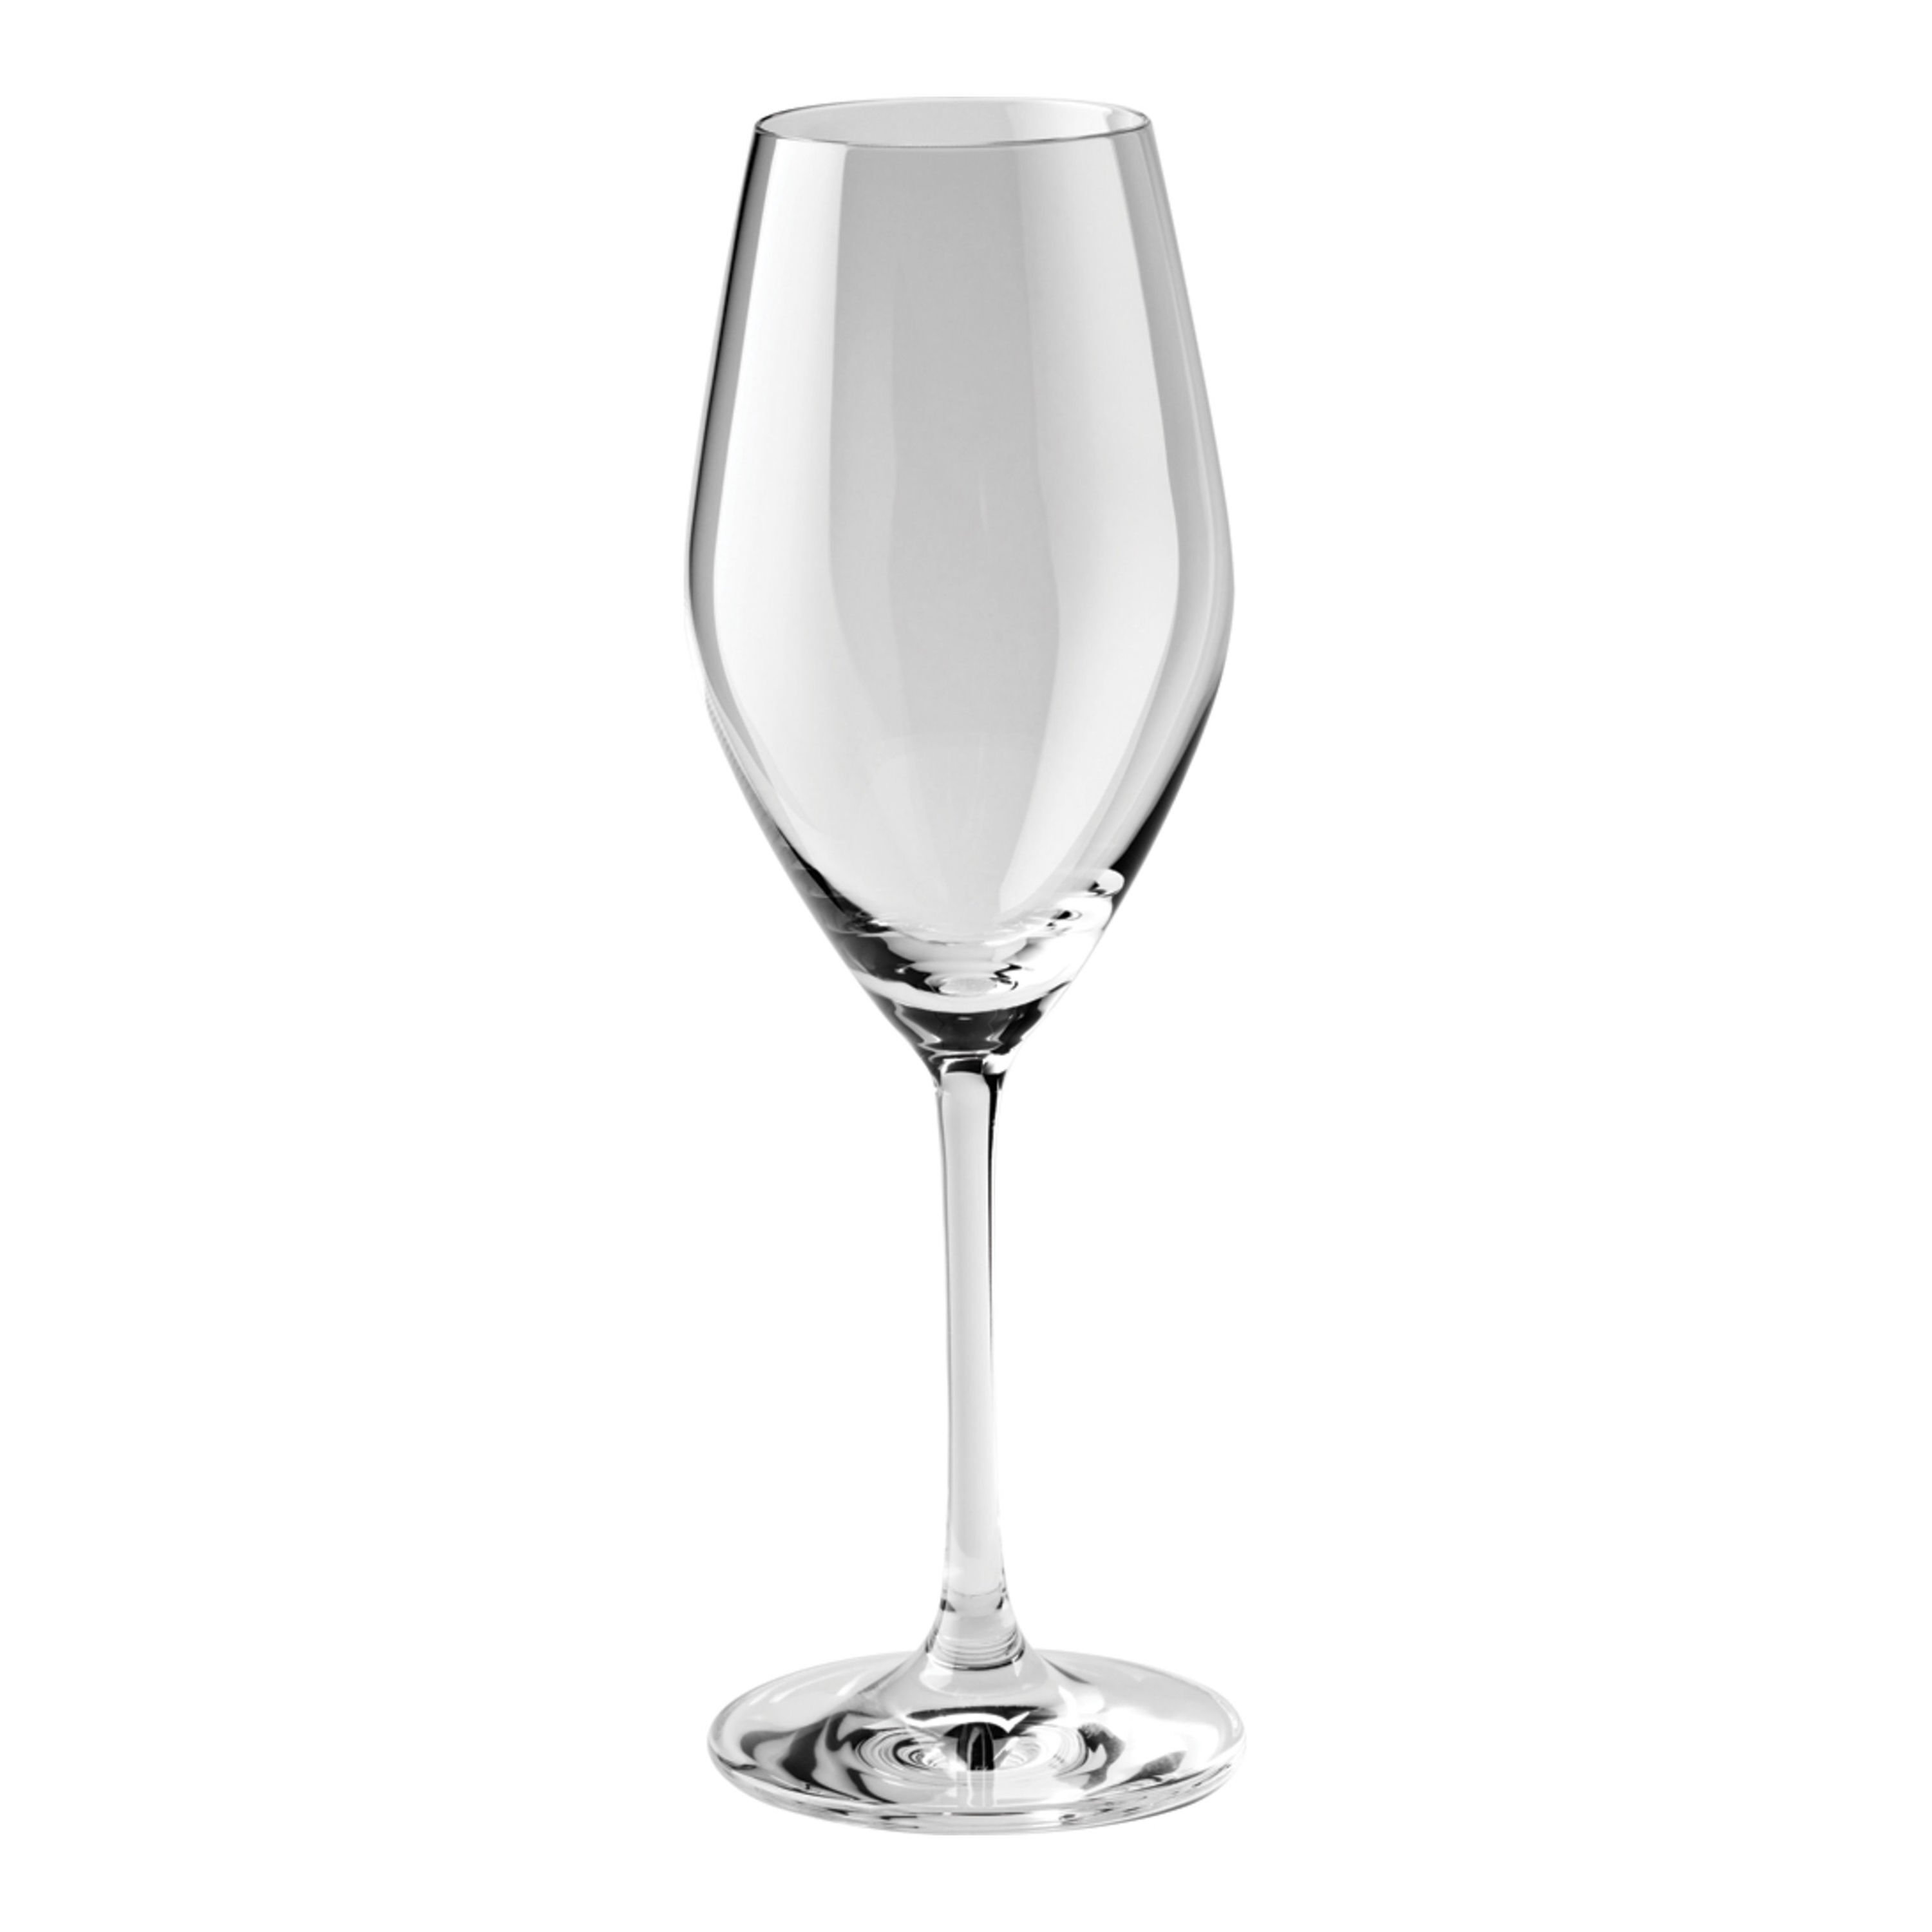 special champagne flutes